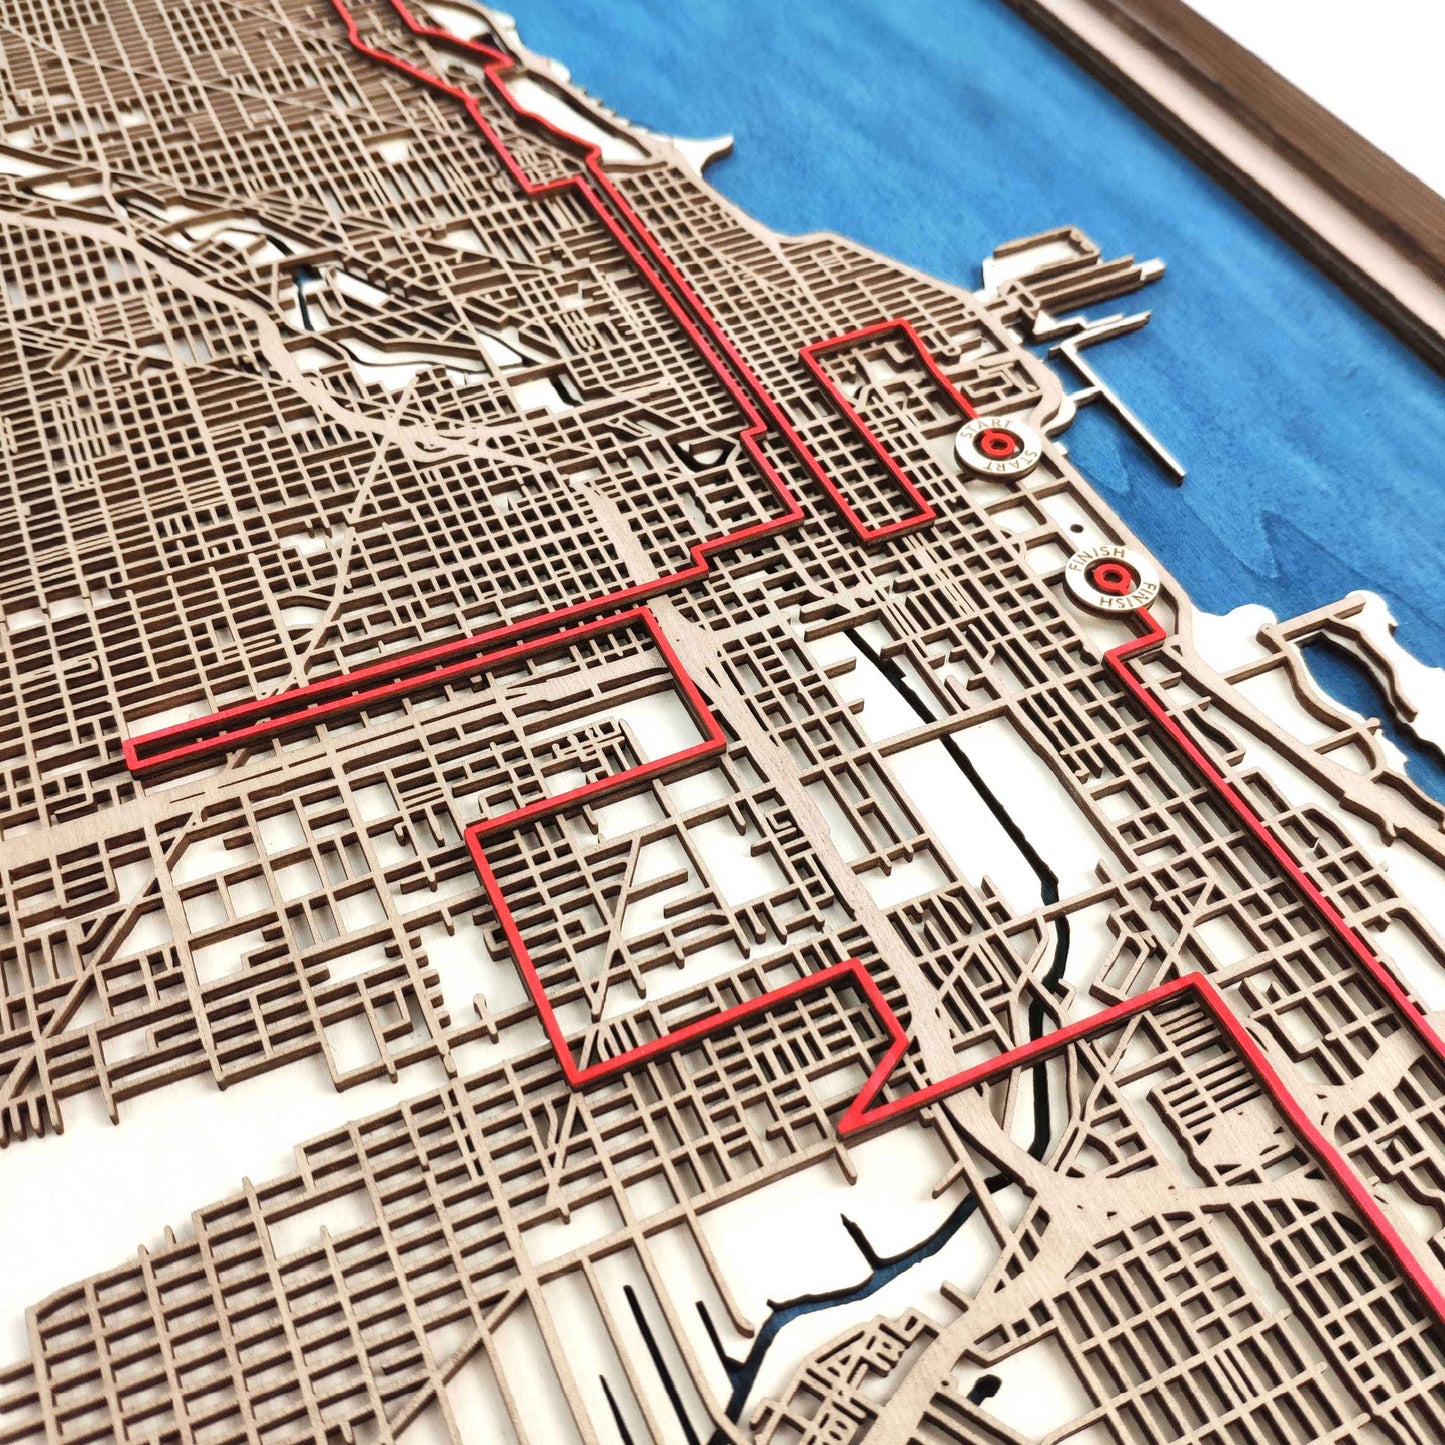 Chicago Marathon Commemorative Wooden Route Map – Collector's Item by CityWood - Custom Wood Map Art - Unique Laser Cut Engraved - Anniversary Gift